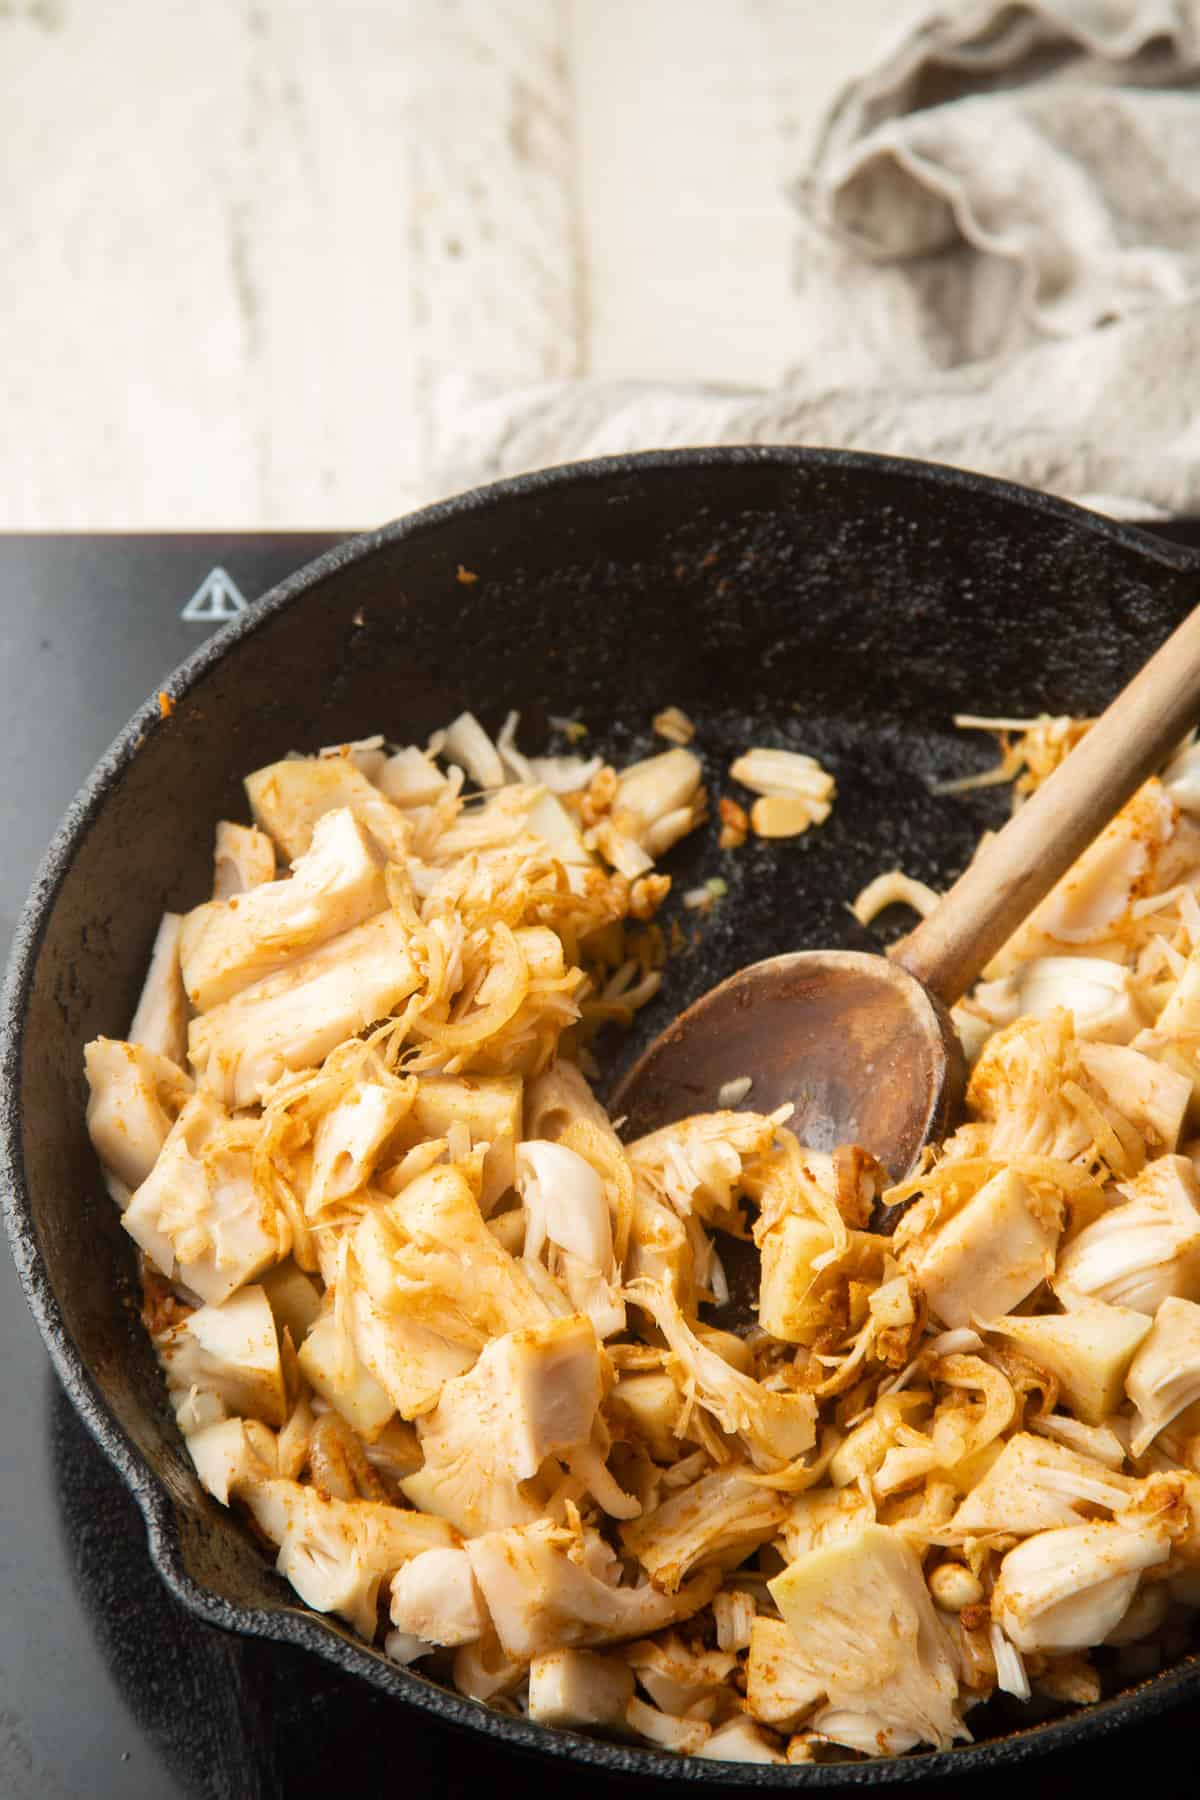 Jackfruit and spices cooking in a skillet with wooden spoon.